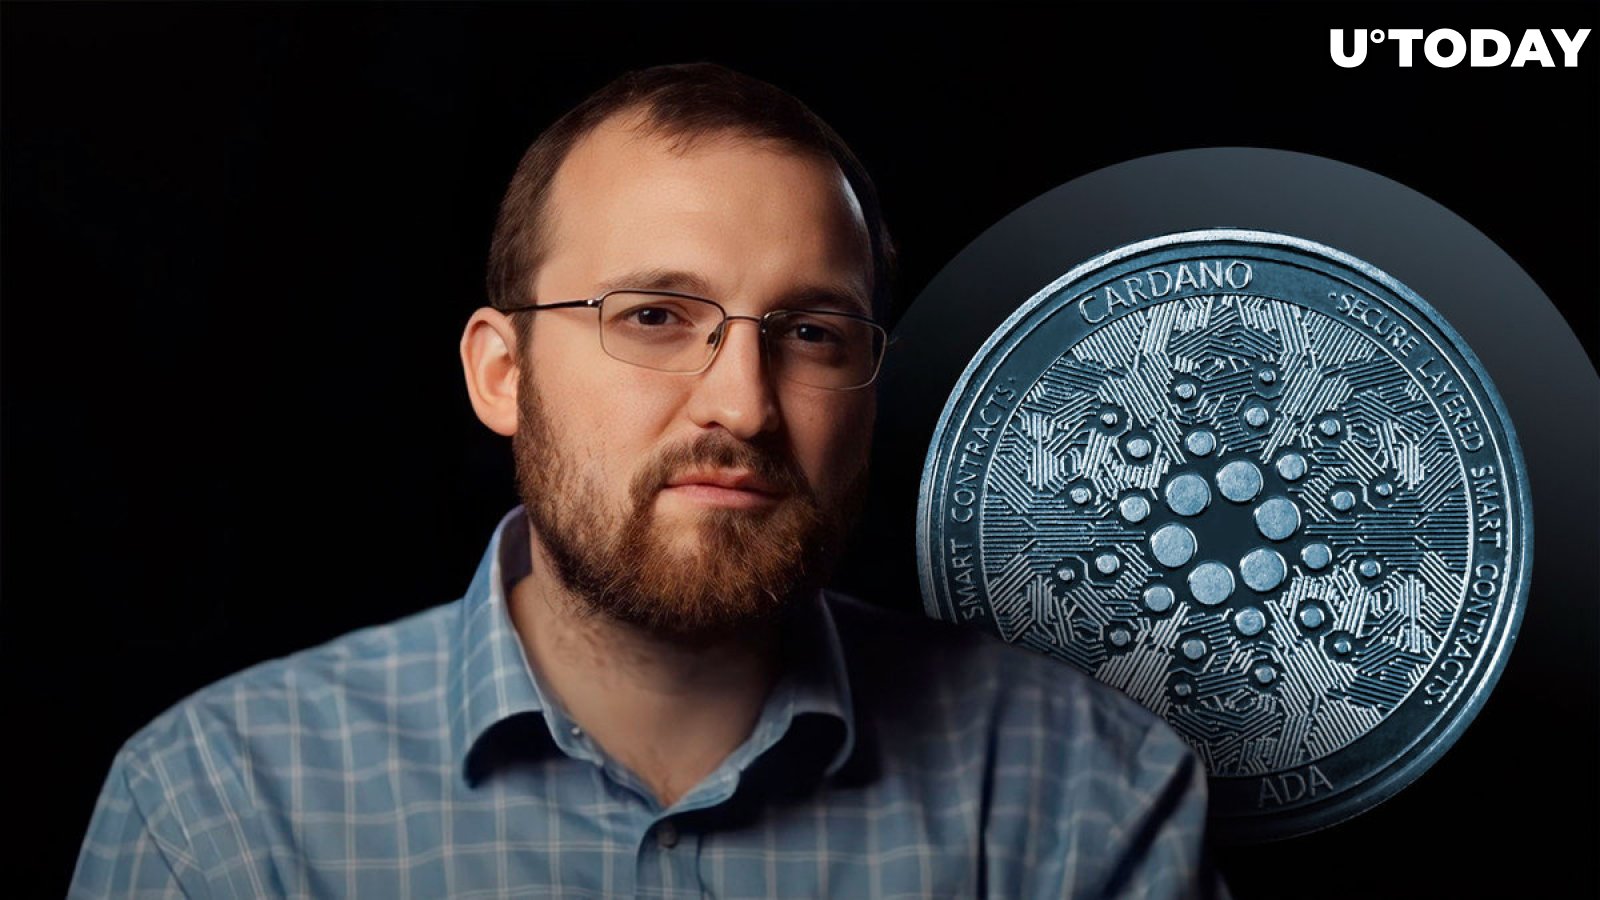 It's 'Weird' Not to Hold Cardano (ADA), Says Charles Hoskinson